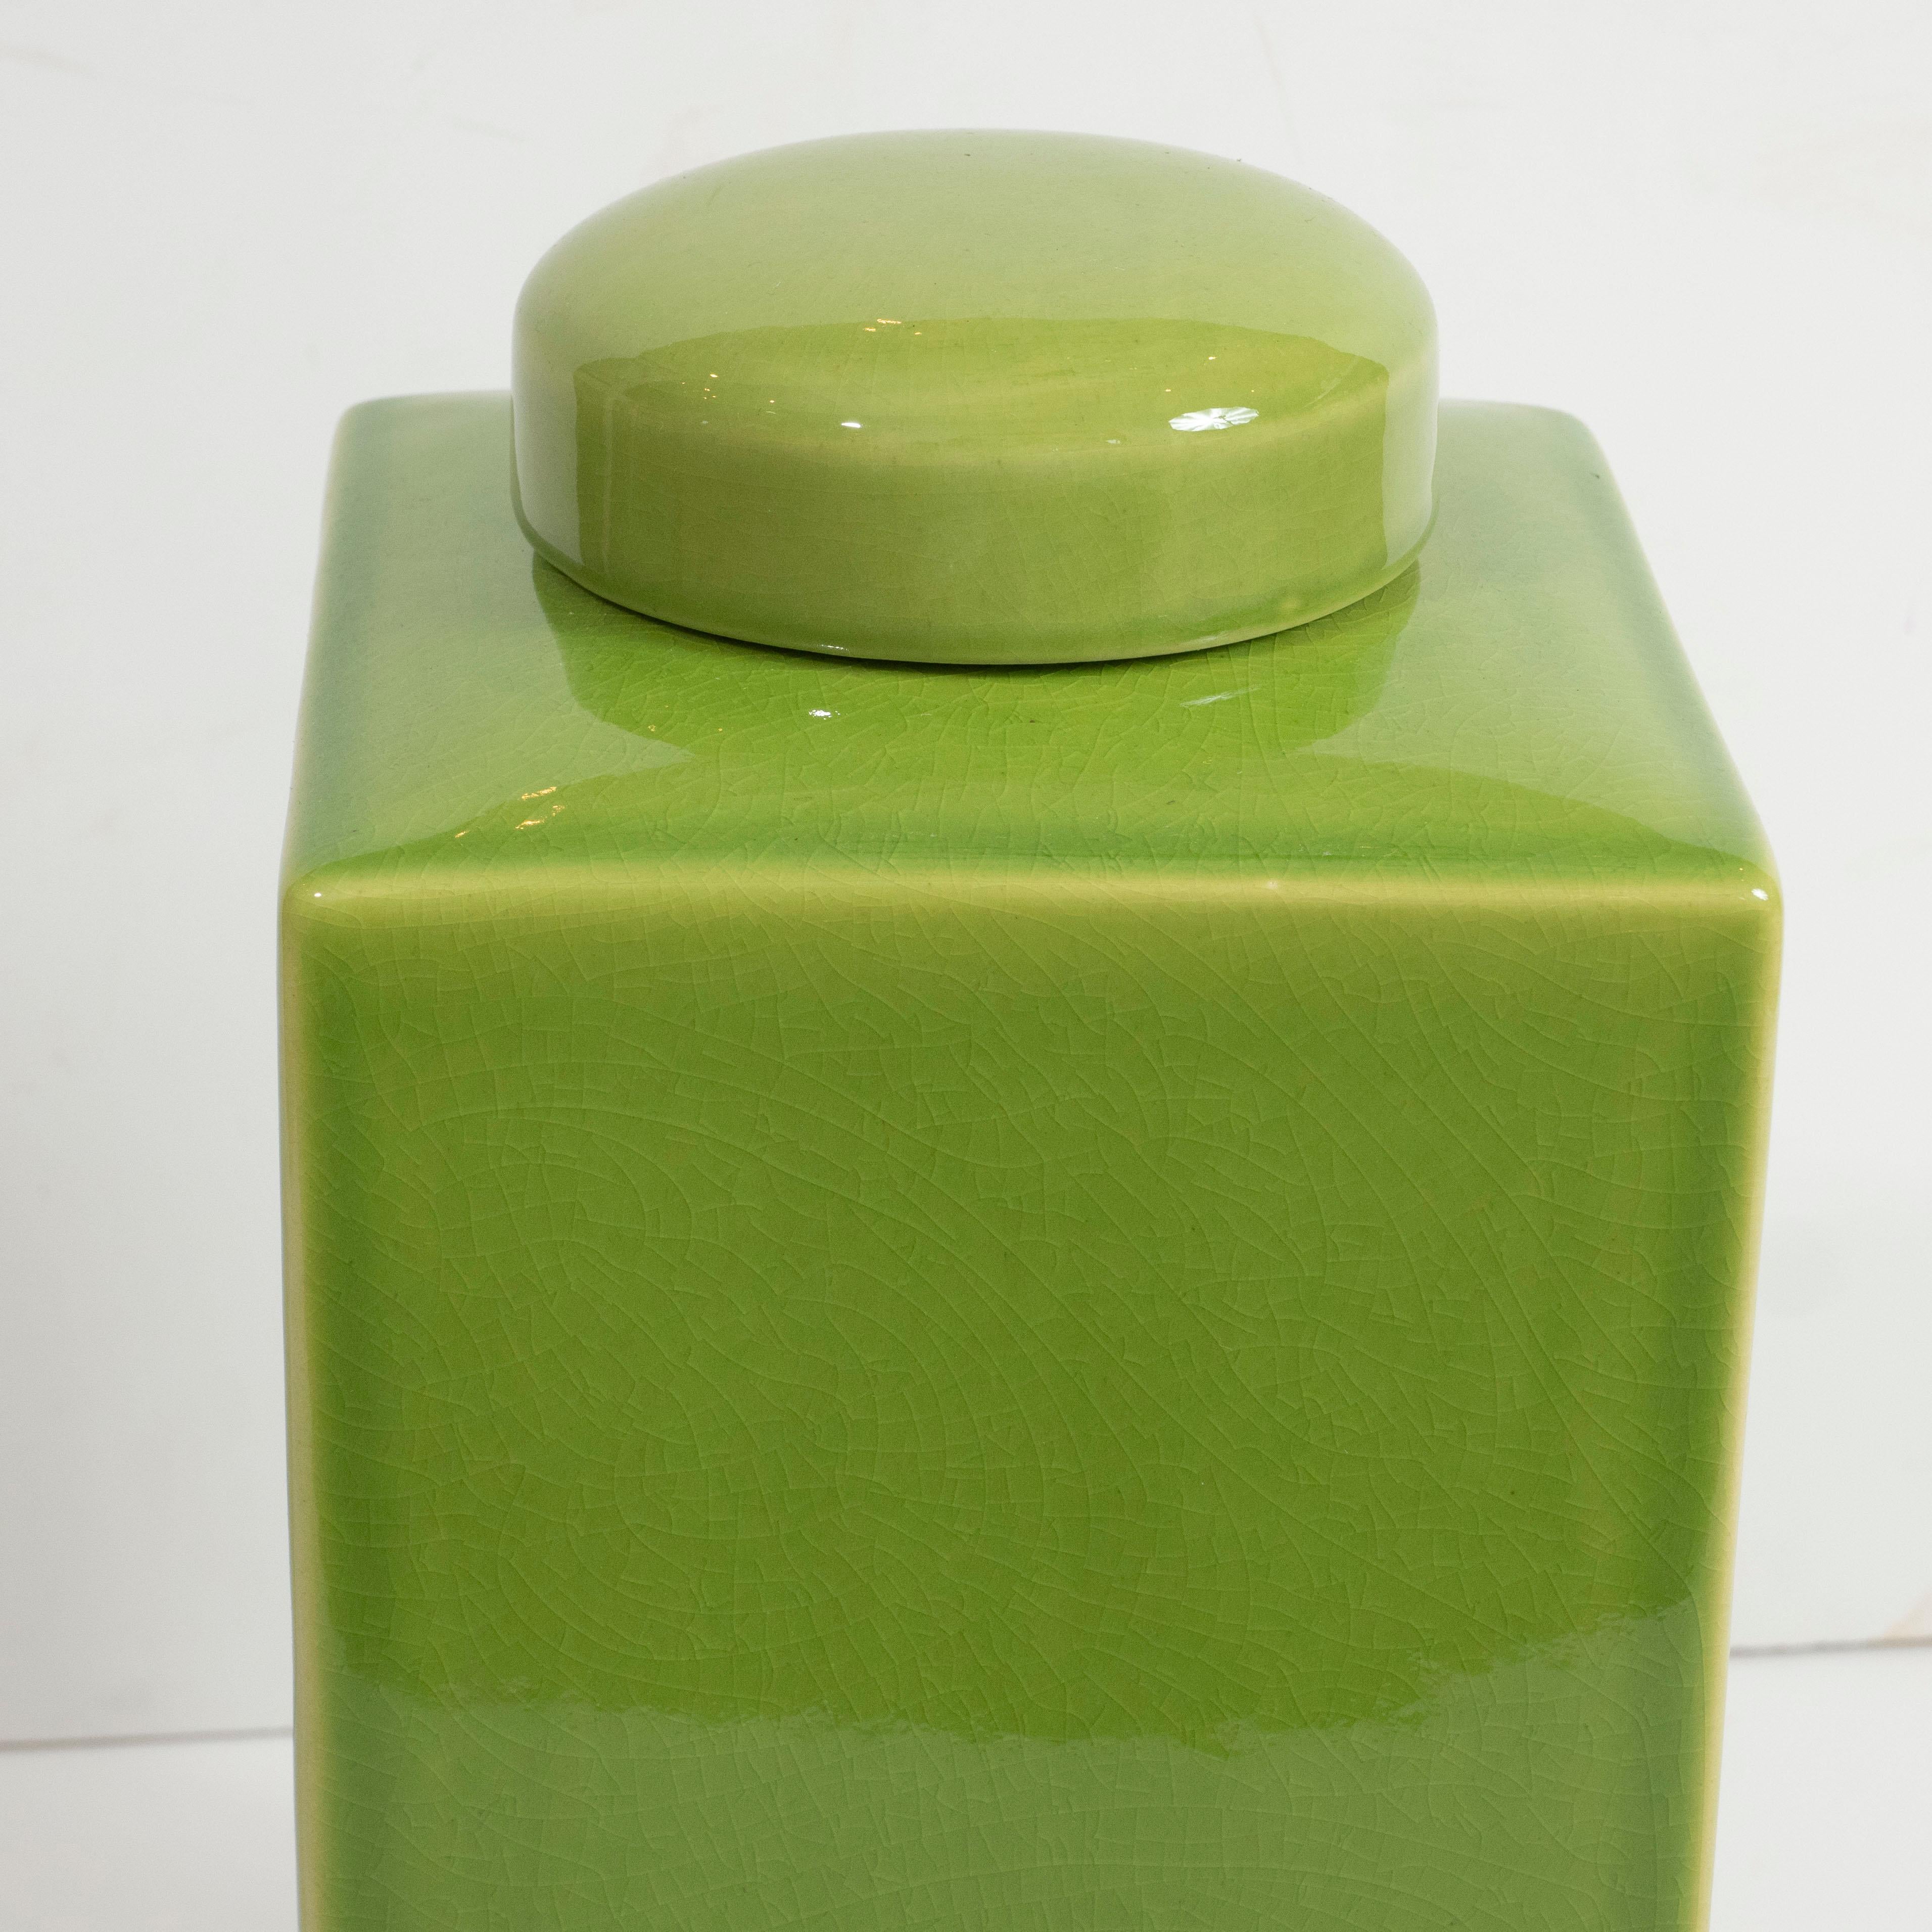 A pair of decorative, square ceramic jars with lids in a stunning apple green.